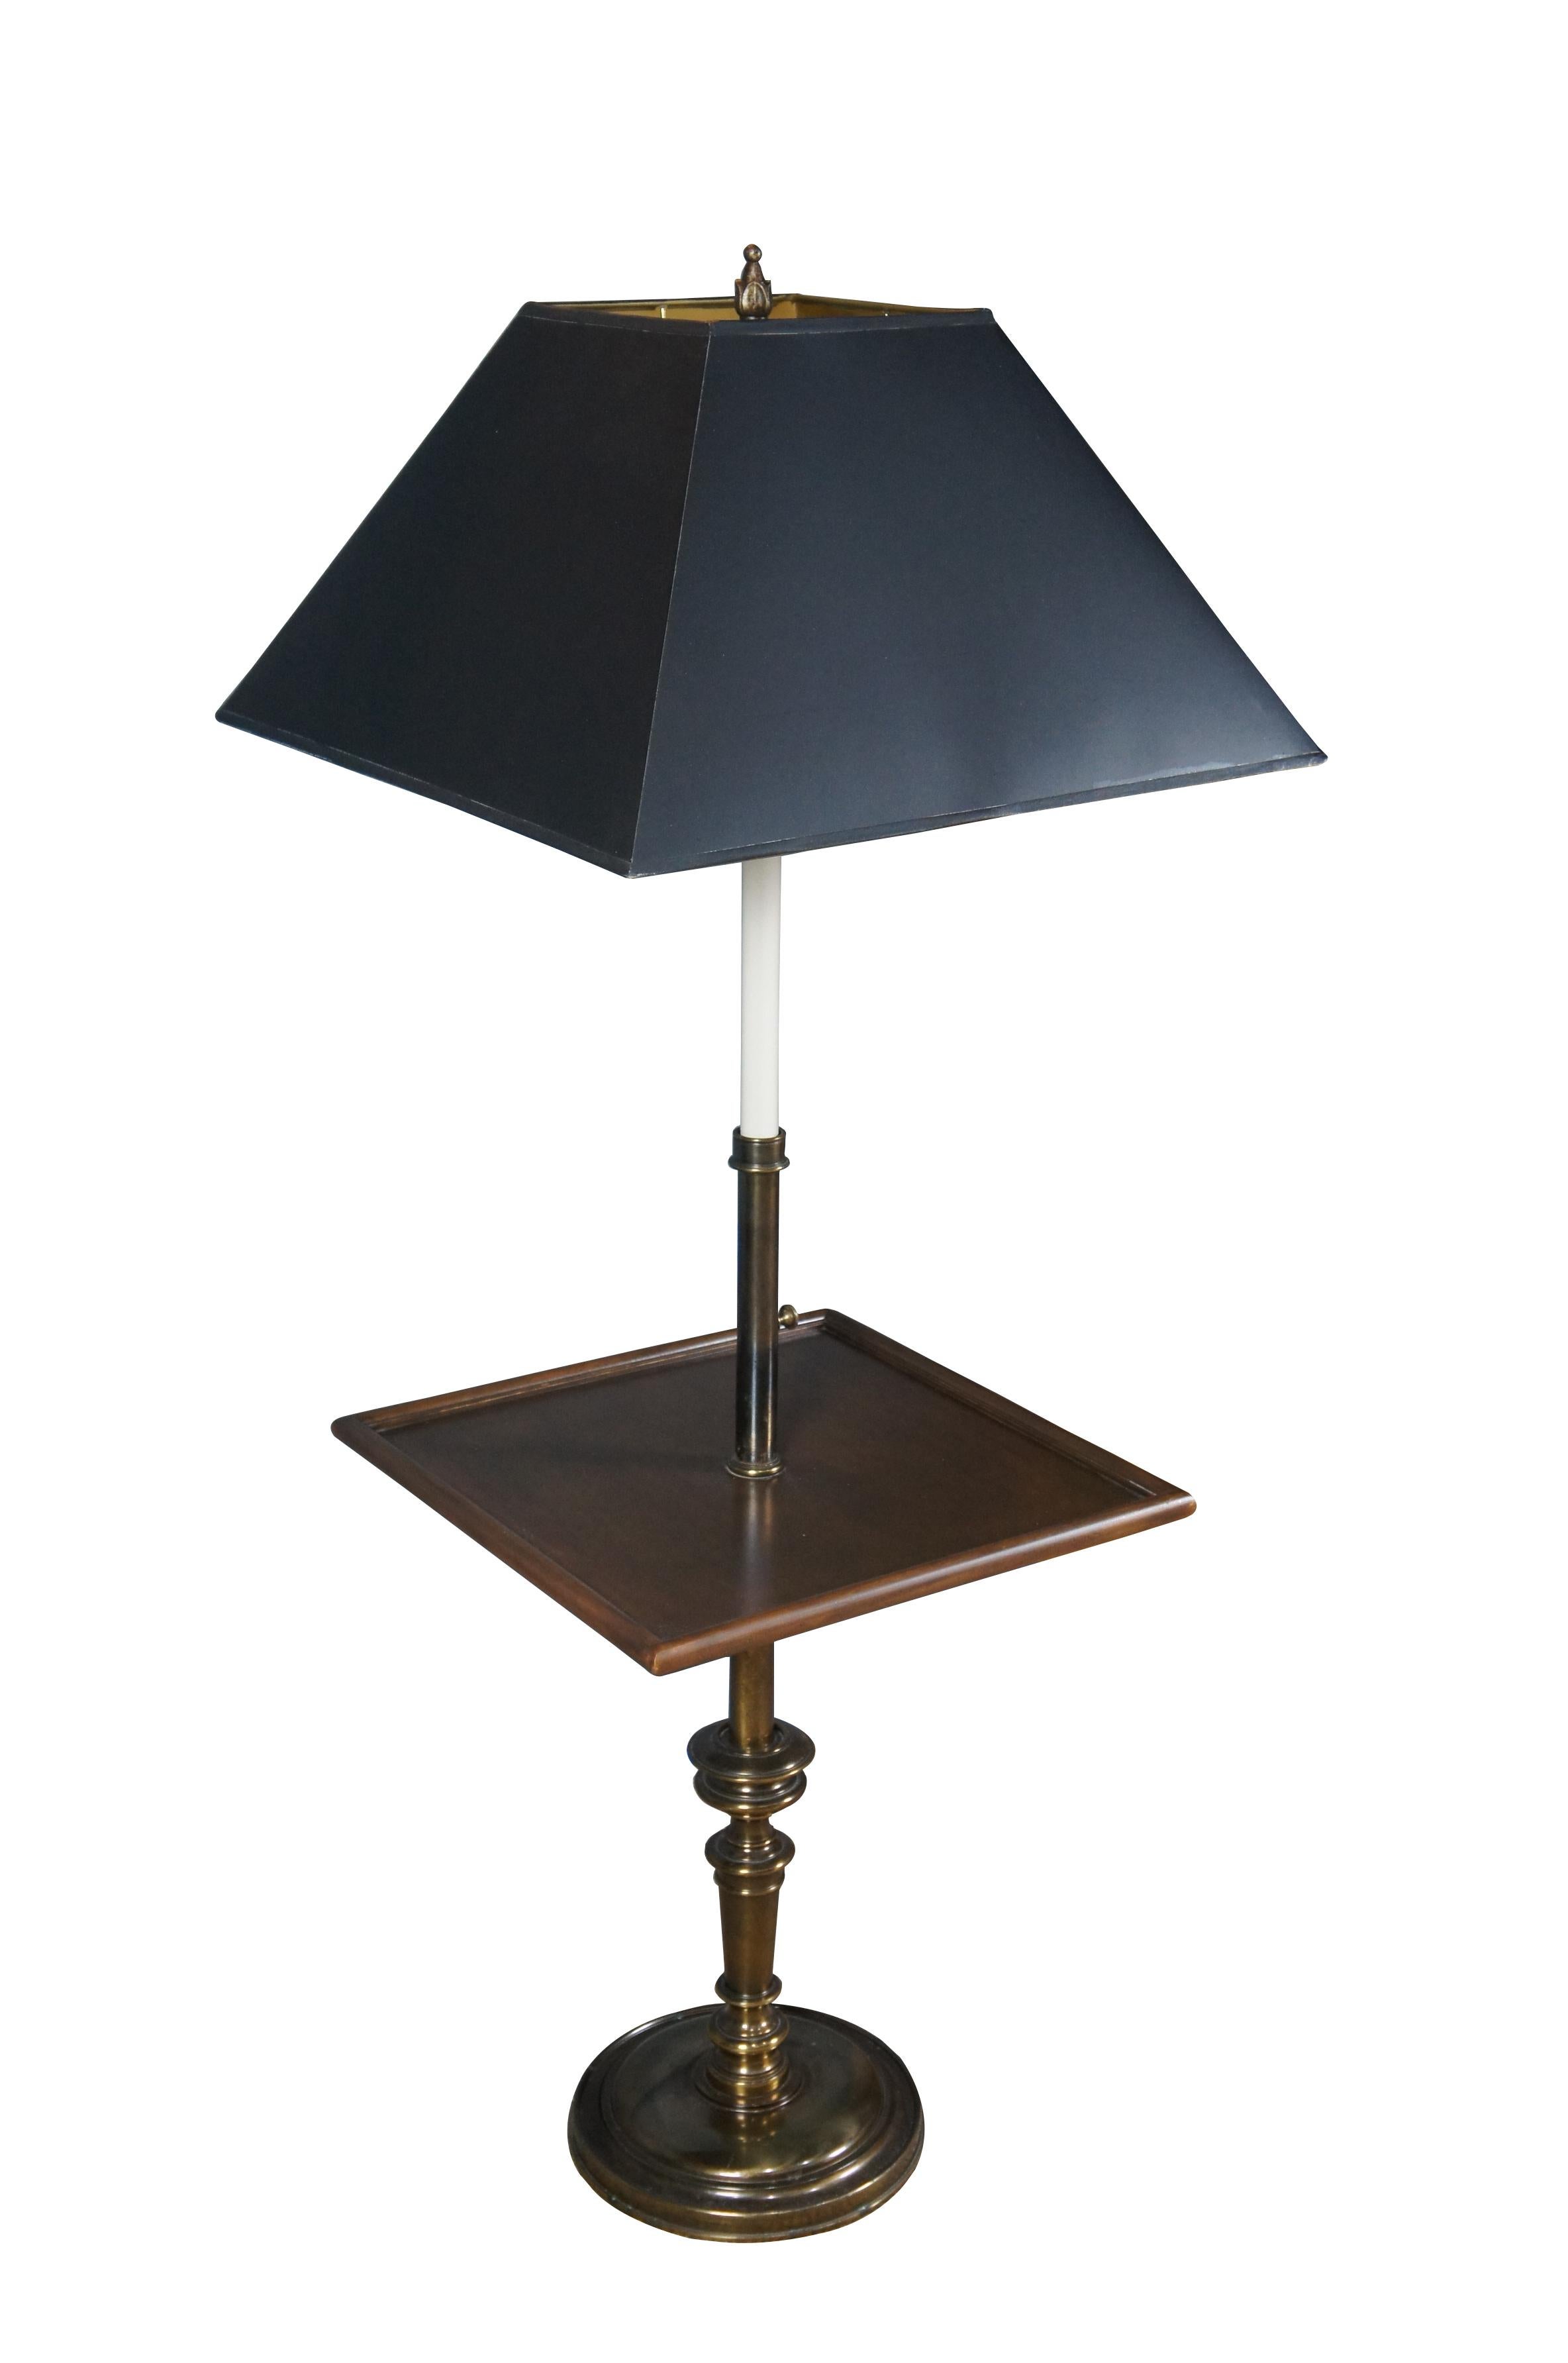 Mid century Stiffel floor lamp made of brass featuring square wood side table and candlestick design.

Dimensions:
17